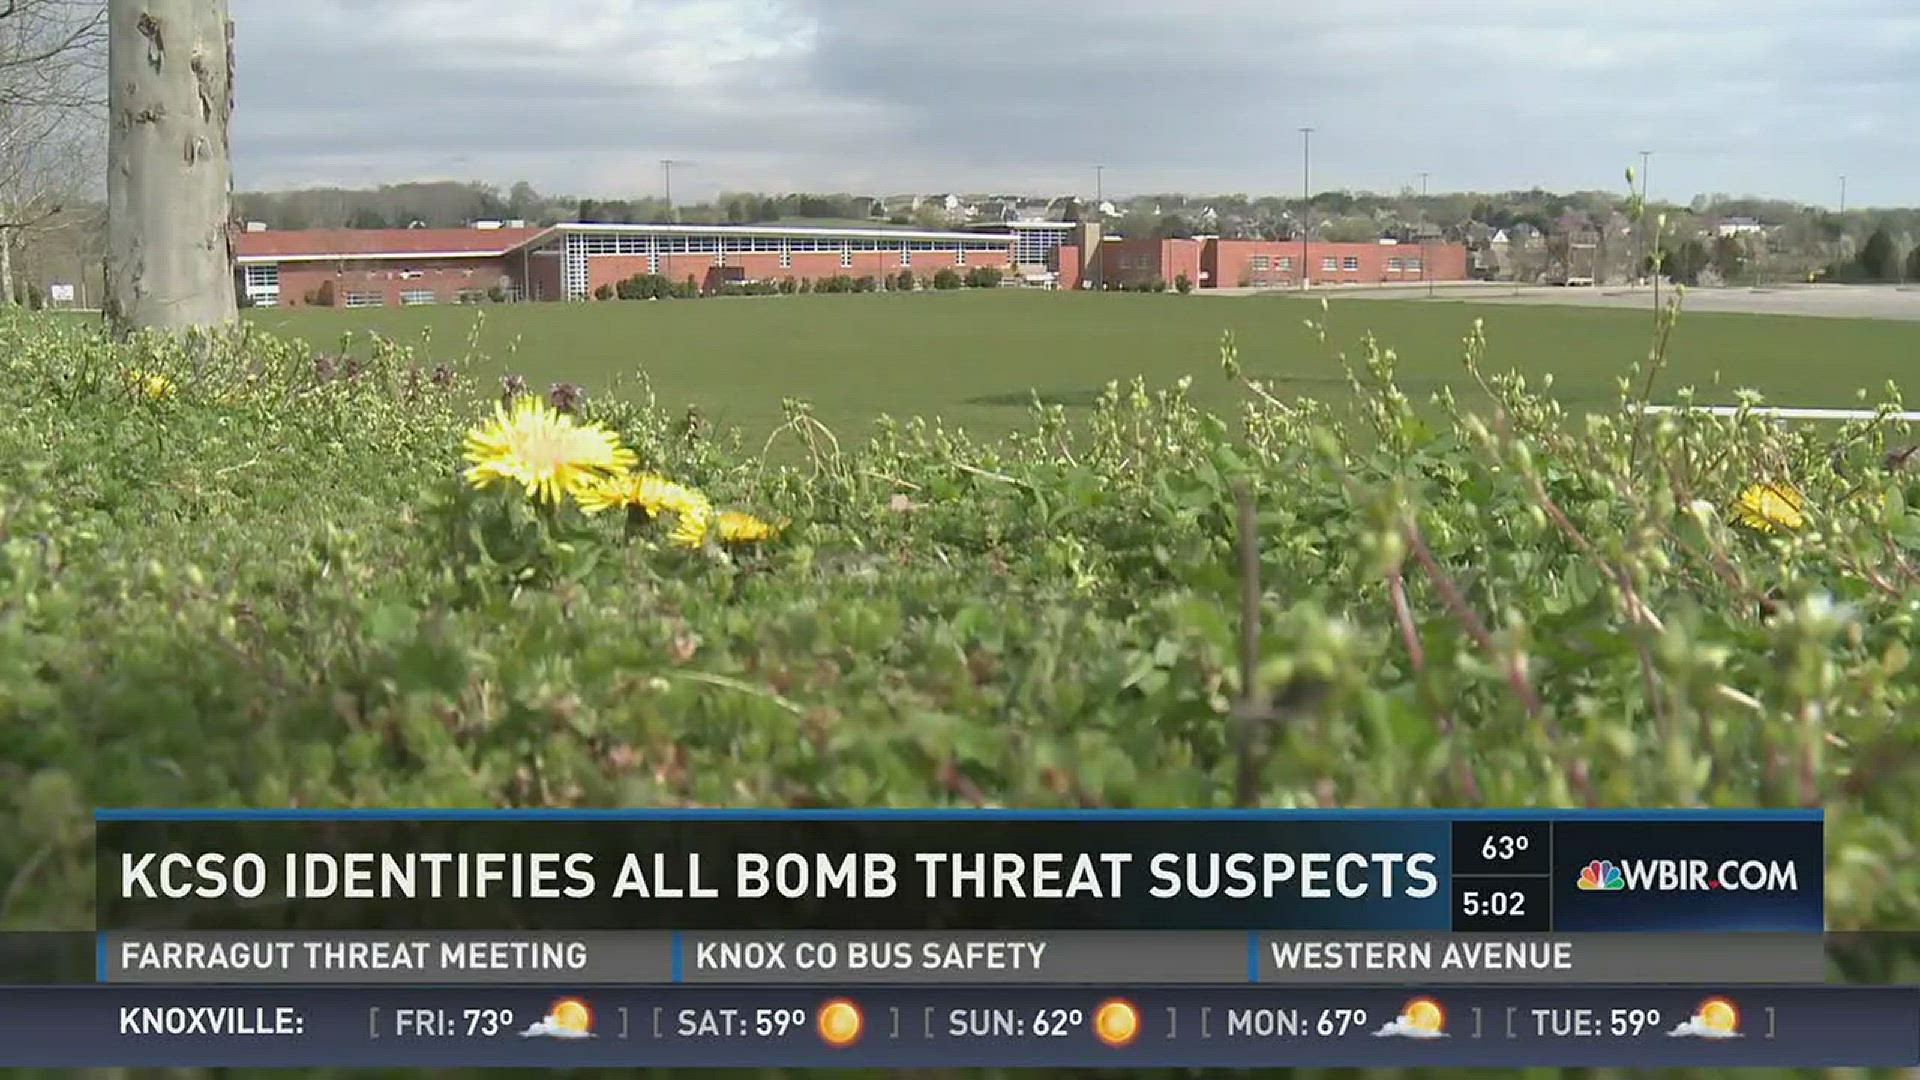 So far this year, there have been 5 bomb threats at Farragut Schools, 4 at the high school and one at Farragut Immediate. There have been 2 at Hardin Valley schools, 1 at Hardin Valley Academy and another at Hardin Valley Elementary. Tonight, leaders are